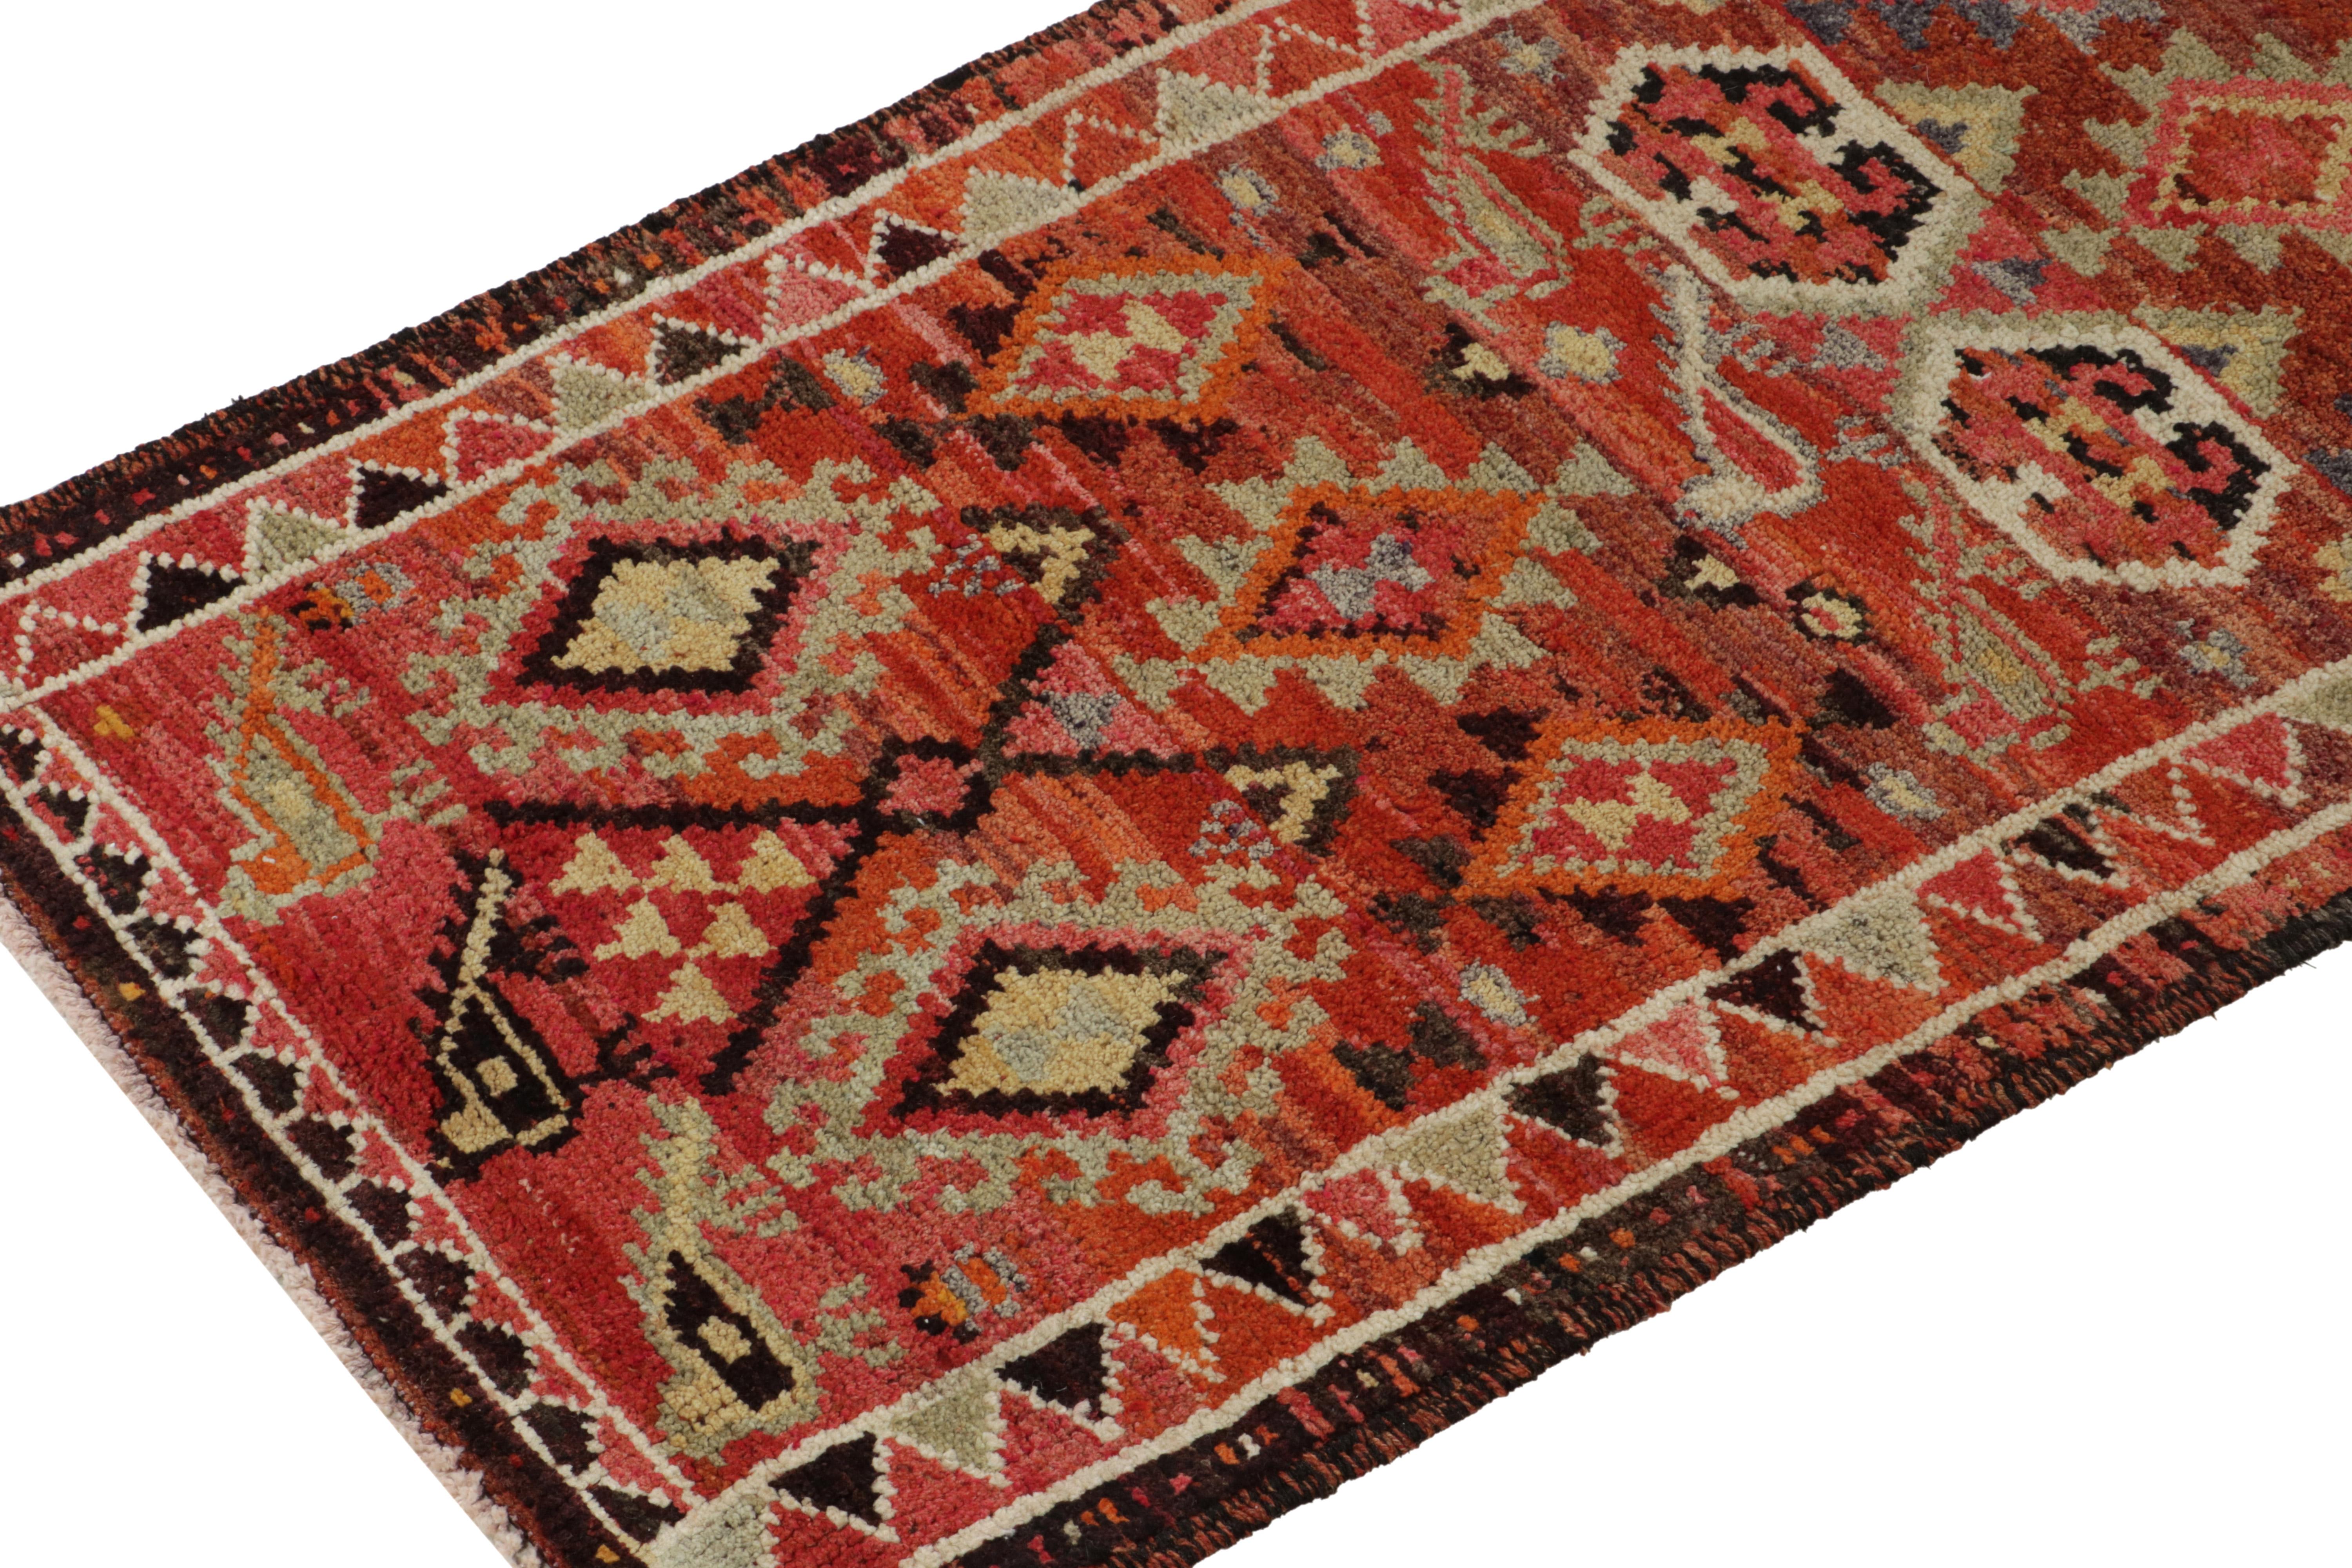 Hand-Knotted 1950s Vintage Tribal Runner in Orange Red Multihued Tribal Motifs by Rug & Kilim For Sale